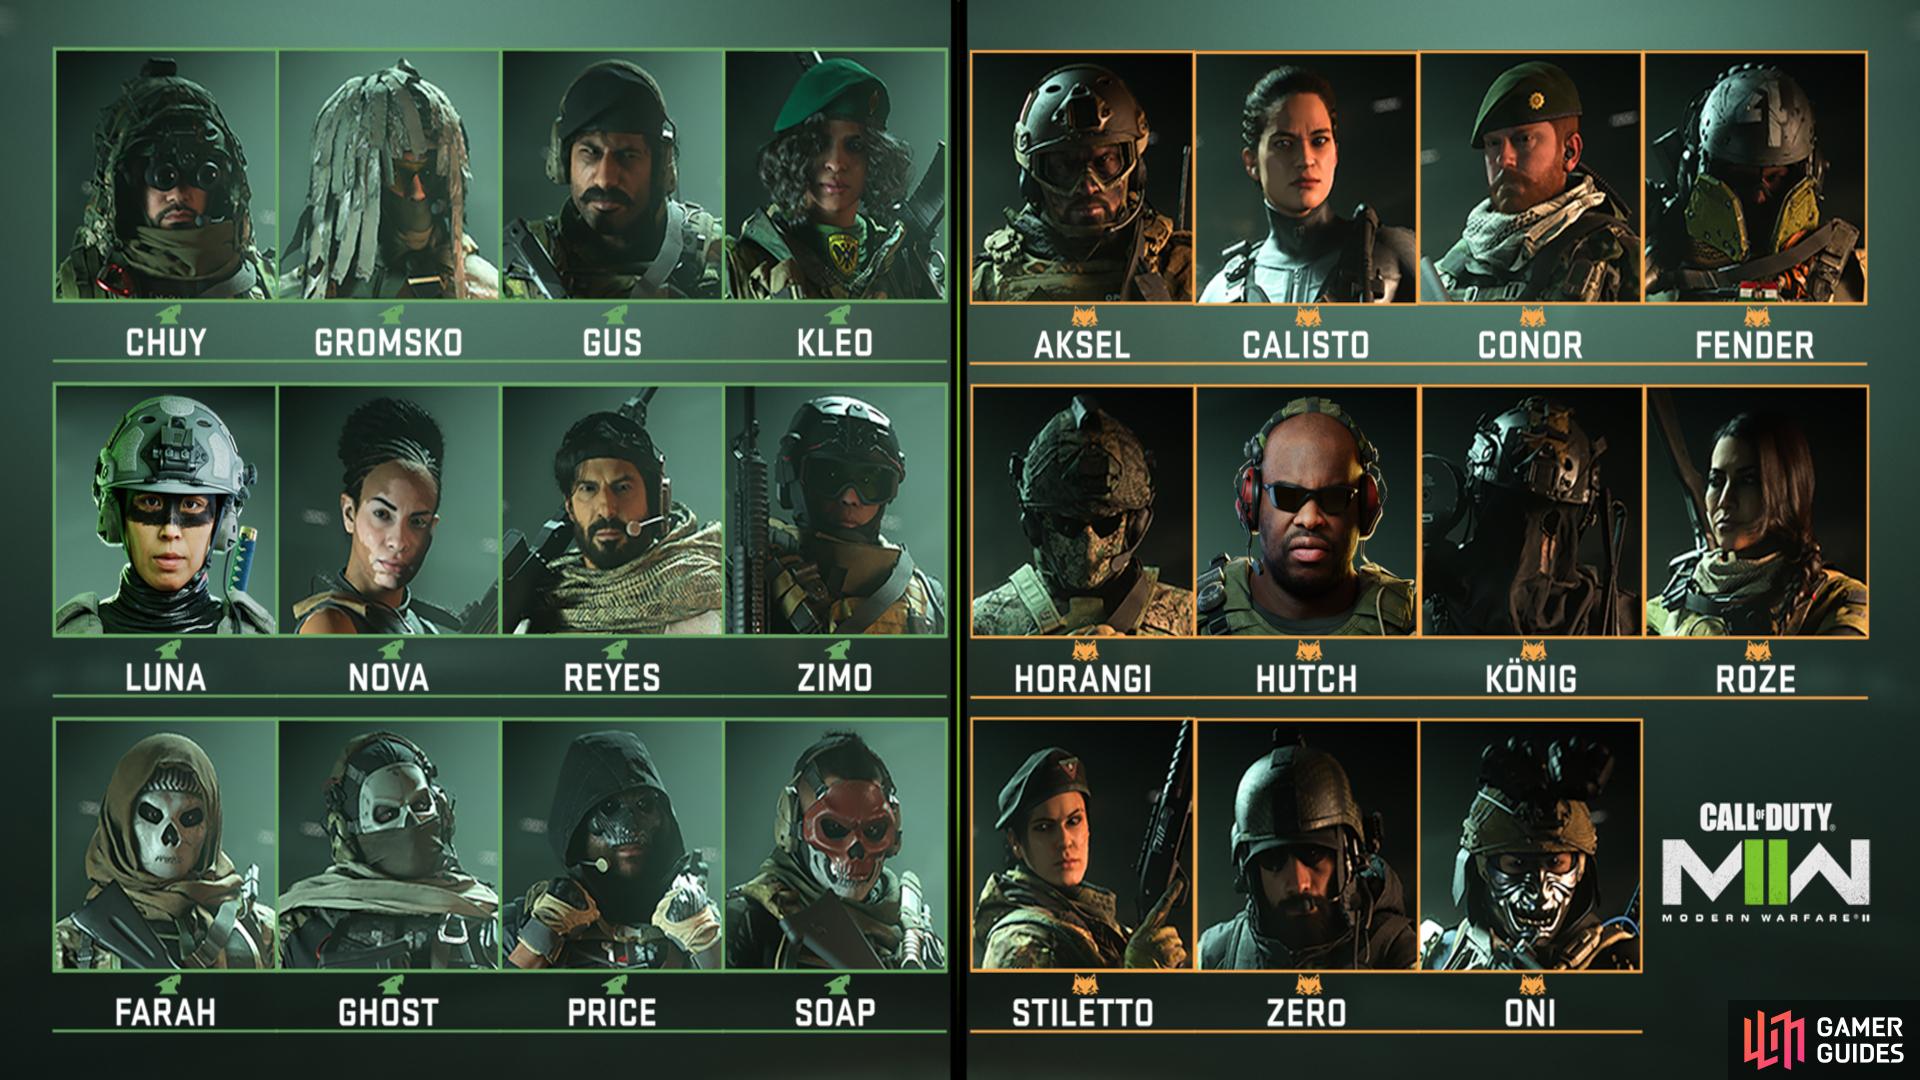 Here is a look at the MW2 Operators coming at launch. Image via Activision.